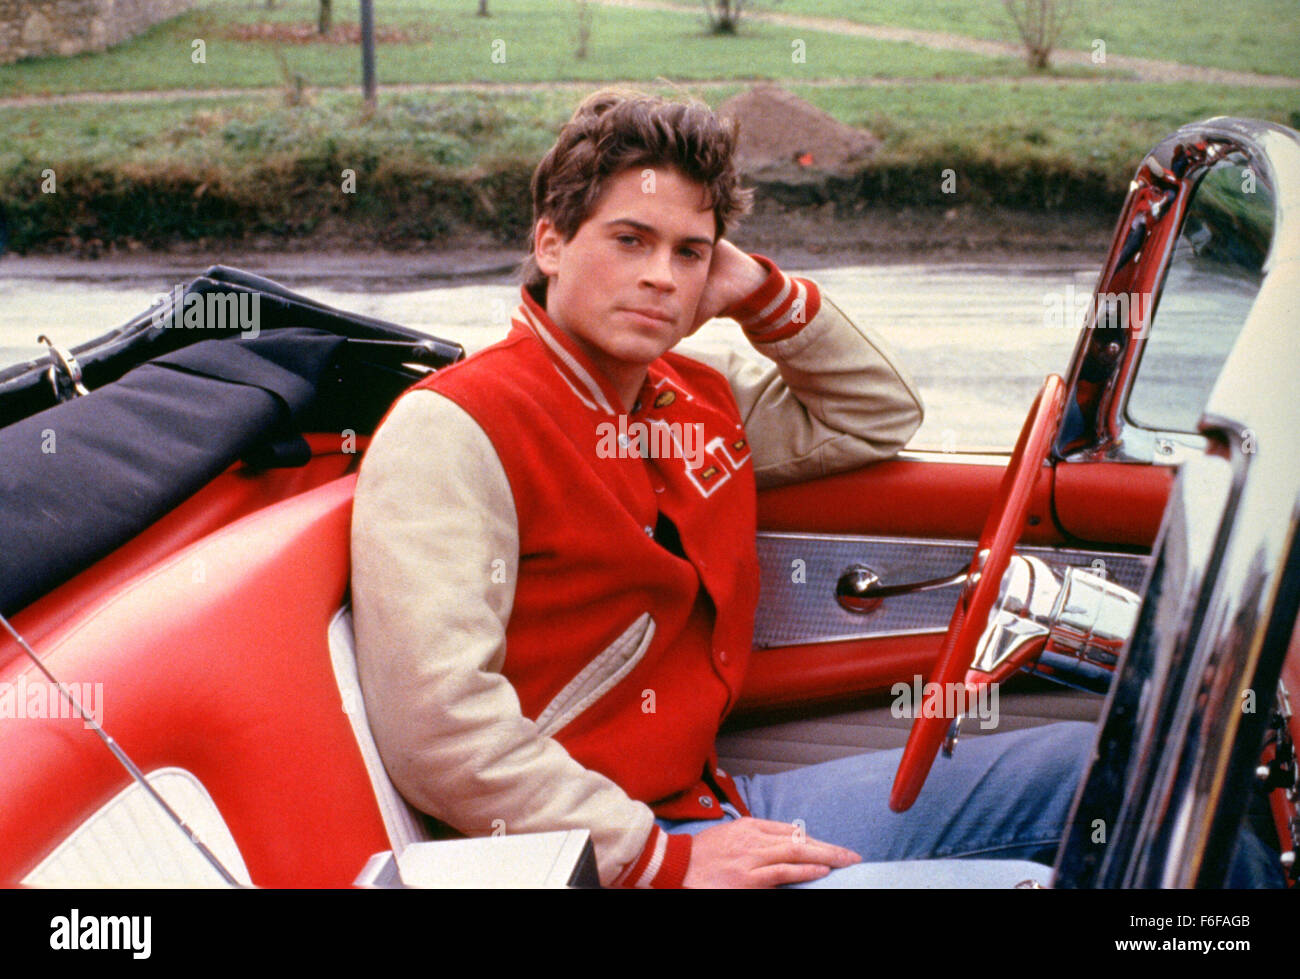 RELEASE DATE: August 24, 1984   MOVIE TITLE: Oxford Blues   DIRECTOR: Robert Boris  STUDIO: Baltic Industrial Finance  PLOT: A young American hustler in Las Vegas spots a rich English Lady. Smitten, he pursues her to England, where his only chance of getting together with her is to enroll in Oxford and join the rowing team   PICTURED: ROB LOWE as Nick De Angelo   (Credit Image: c Baltic Industrial Finance/Entertainment Pictures) Stock Photo